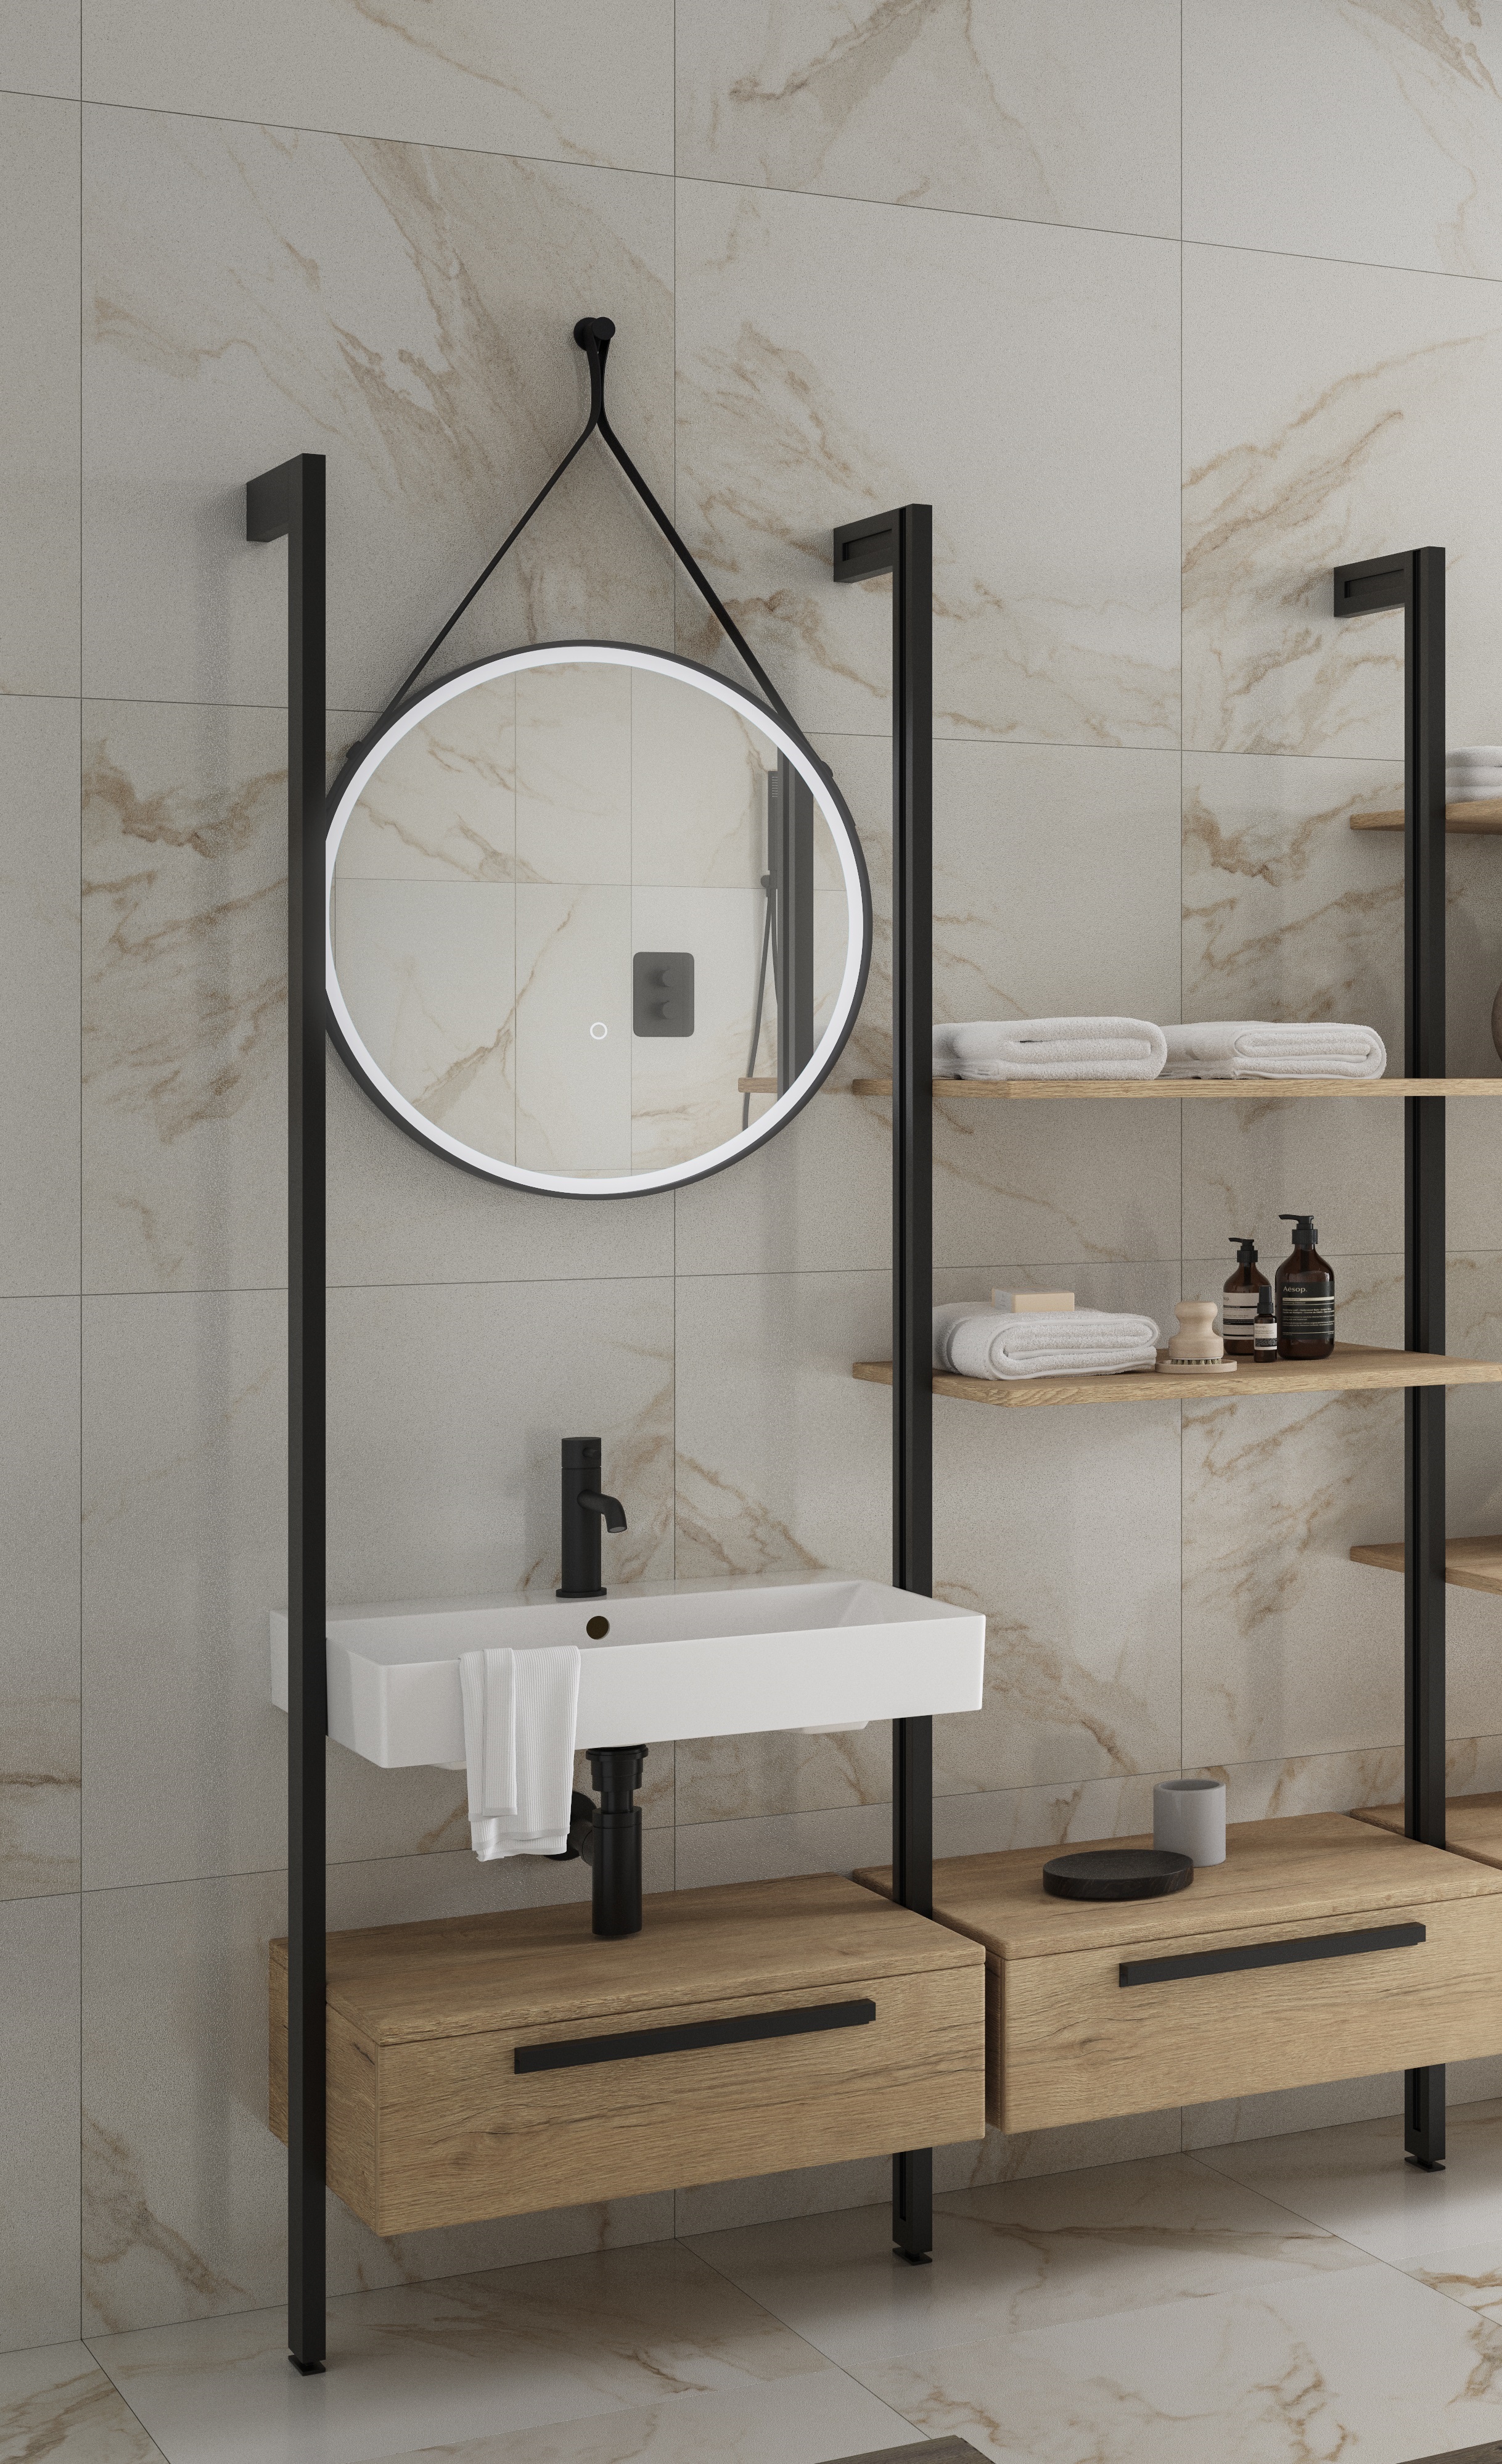 Wickes Rimini Wall System Vanity & Tower Unit Only with Shelves & White Basin - 1800mm